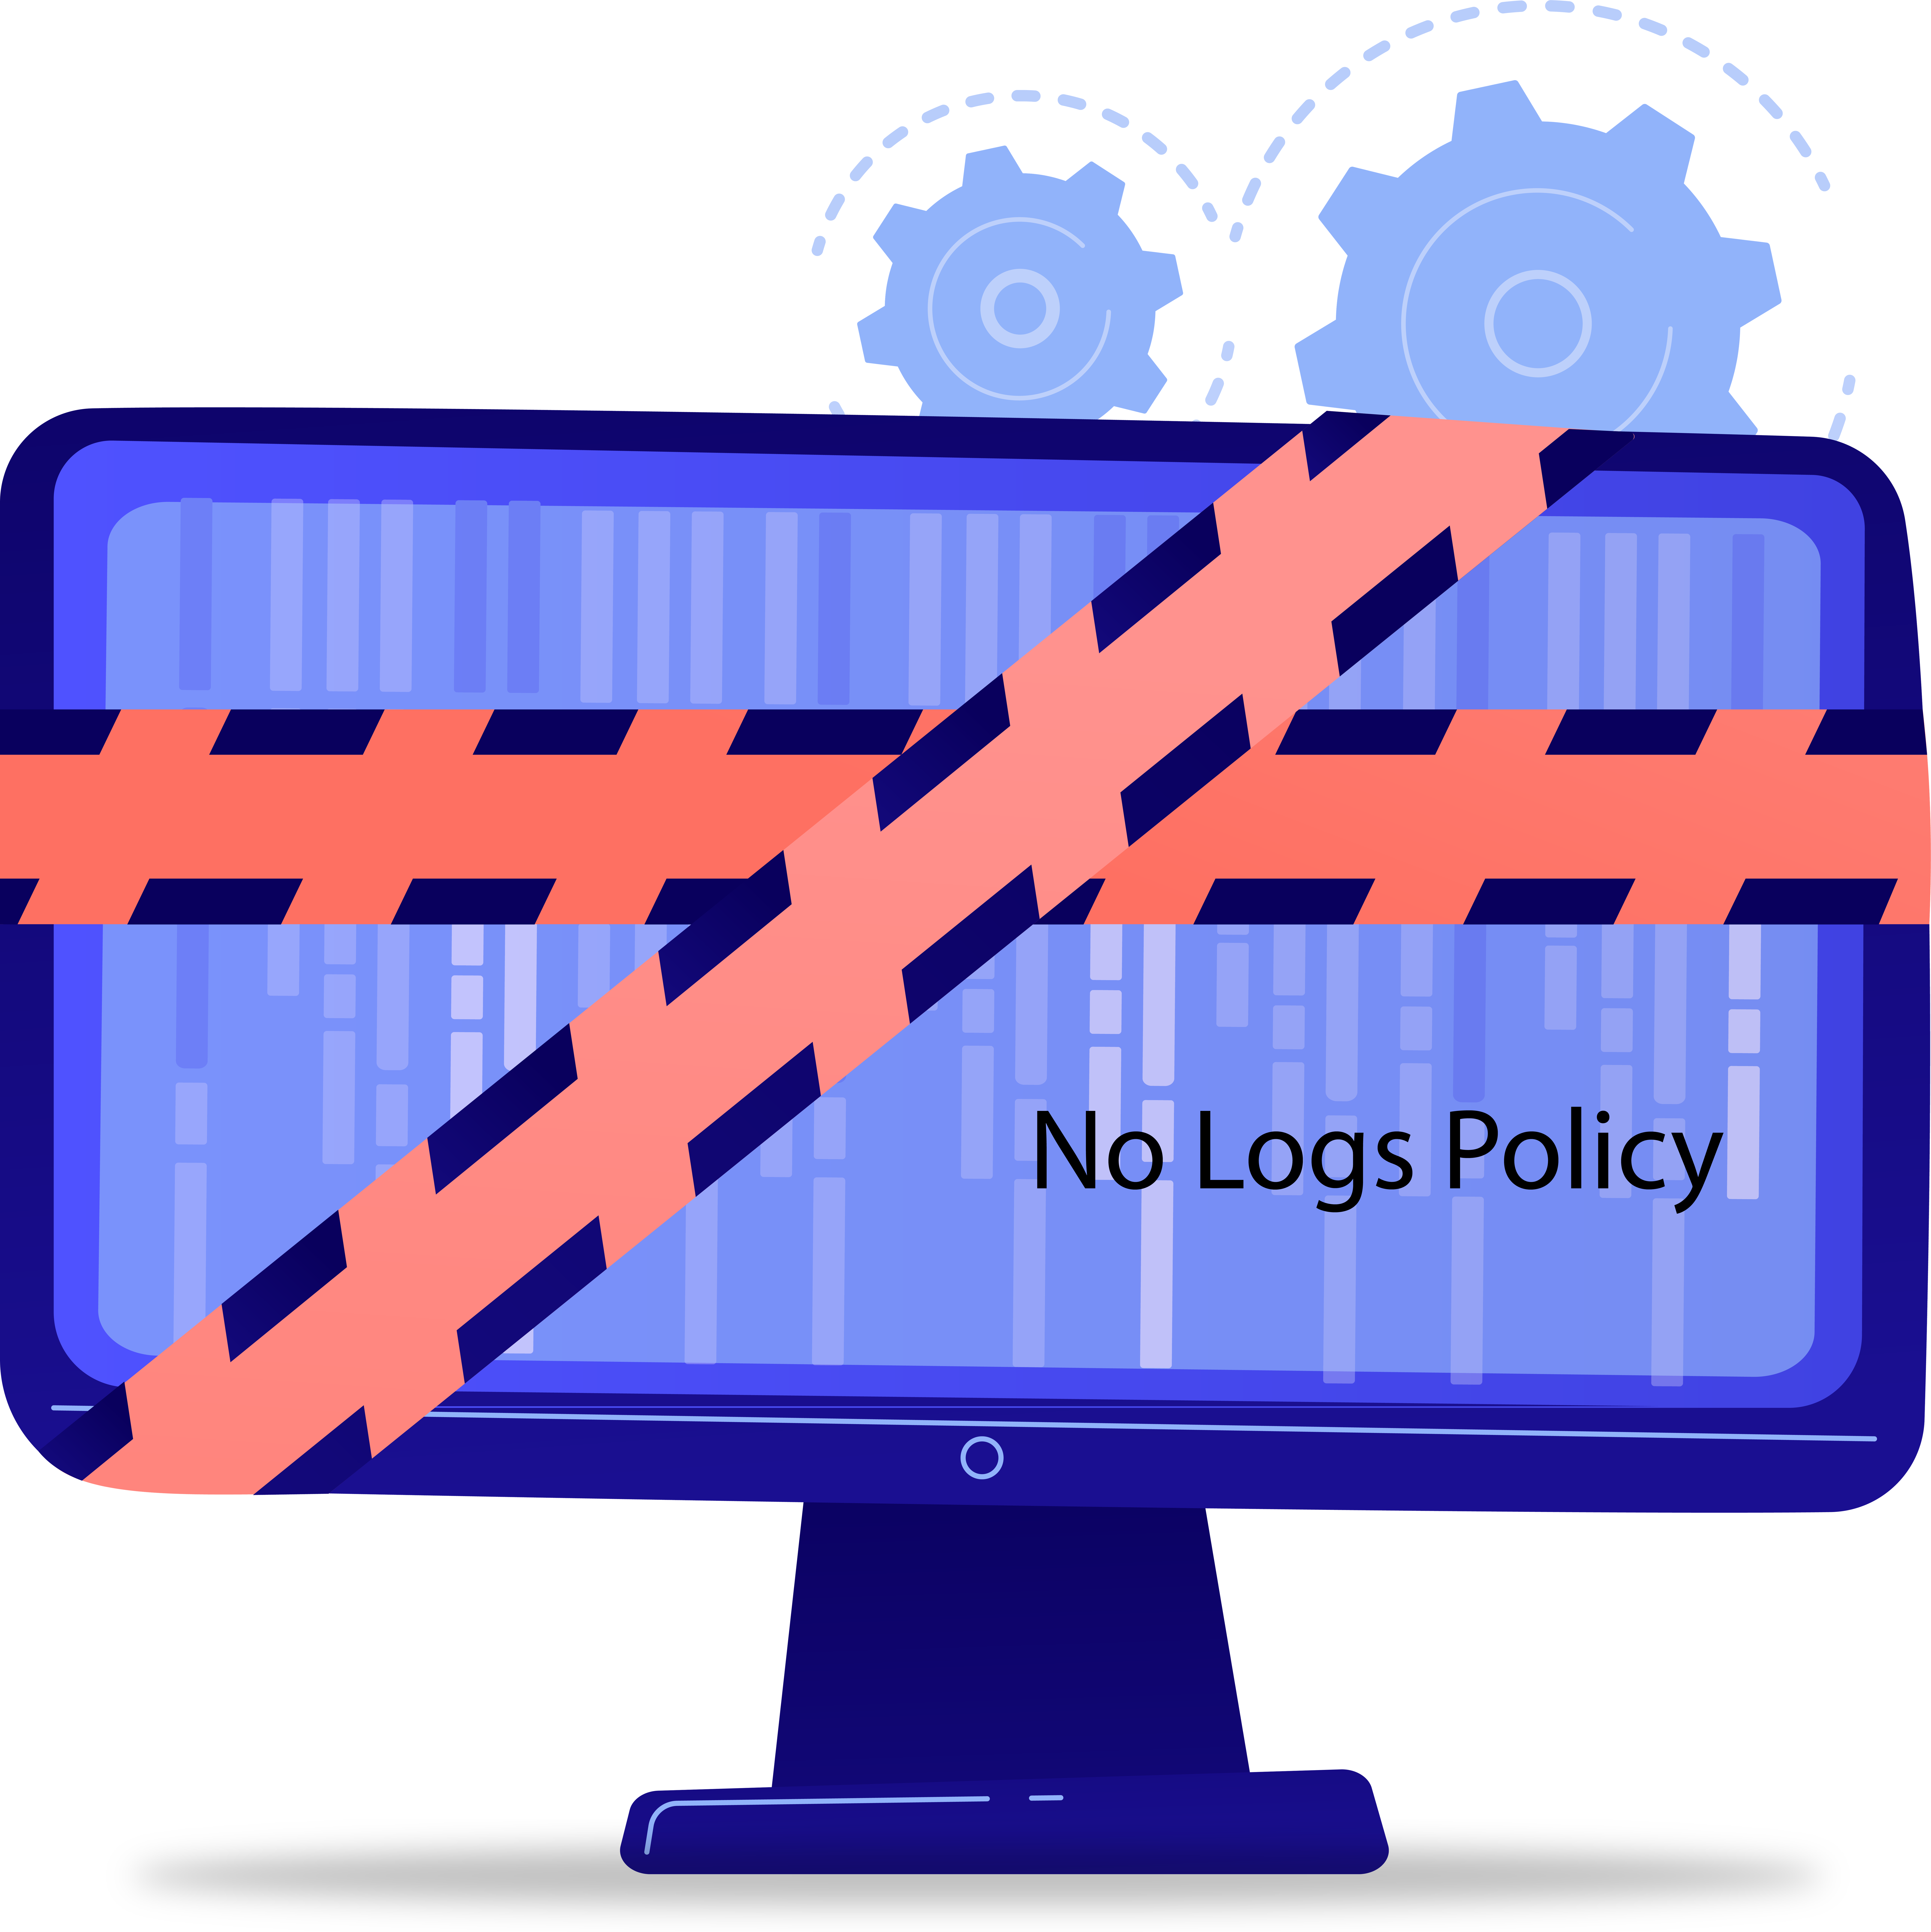 No logs policy